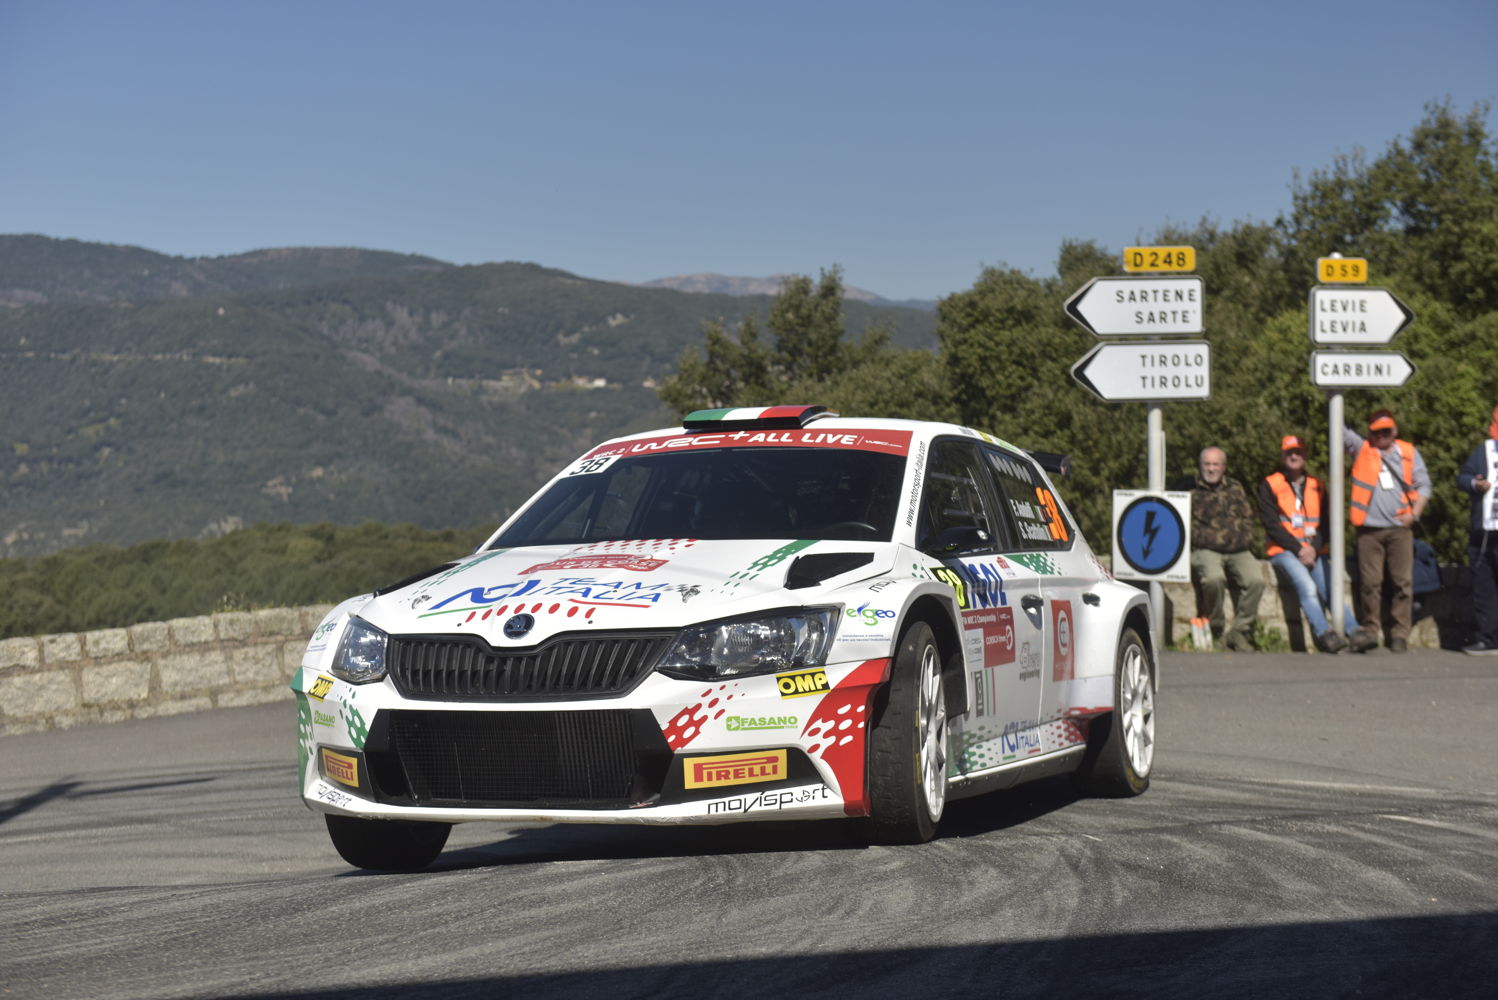 Driving a privately entered ŠKODA FABIA R5, Fabio Andolfi/Simone Scattolin (ITA/ITA) secured a well deserved victory after a tense battle in WRC 2 category